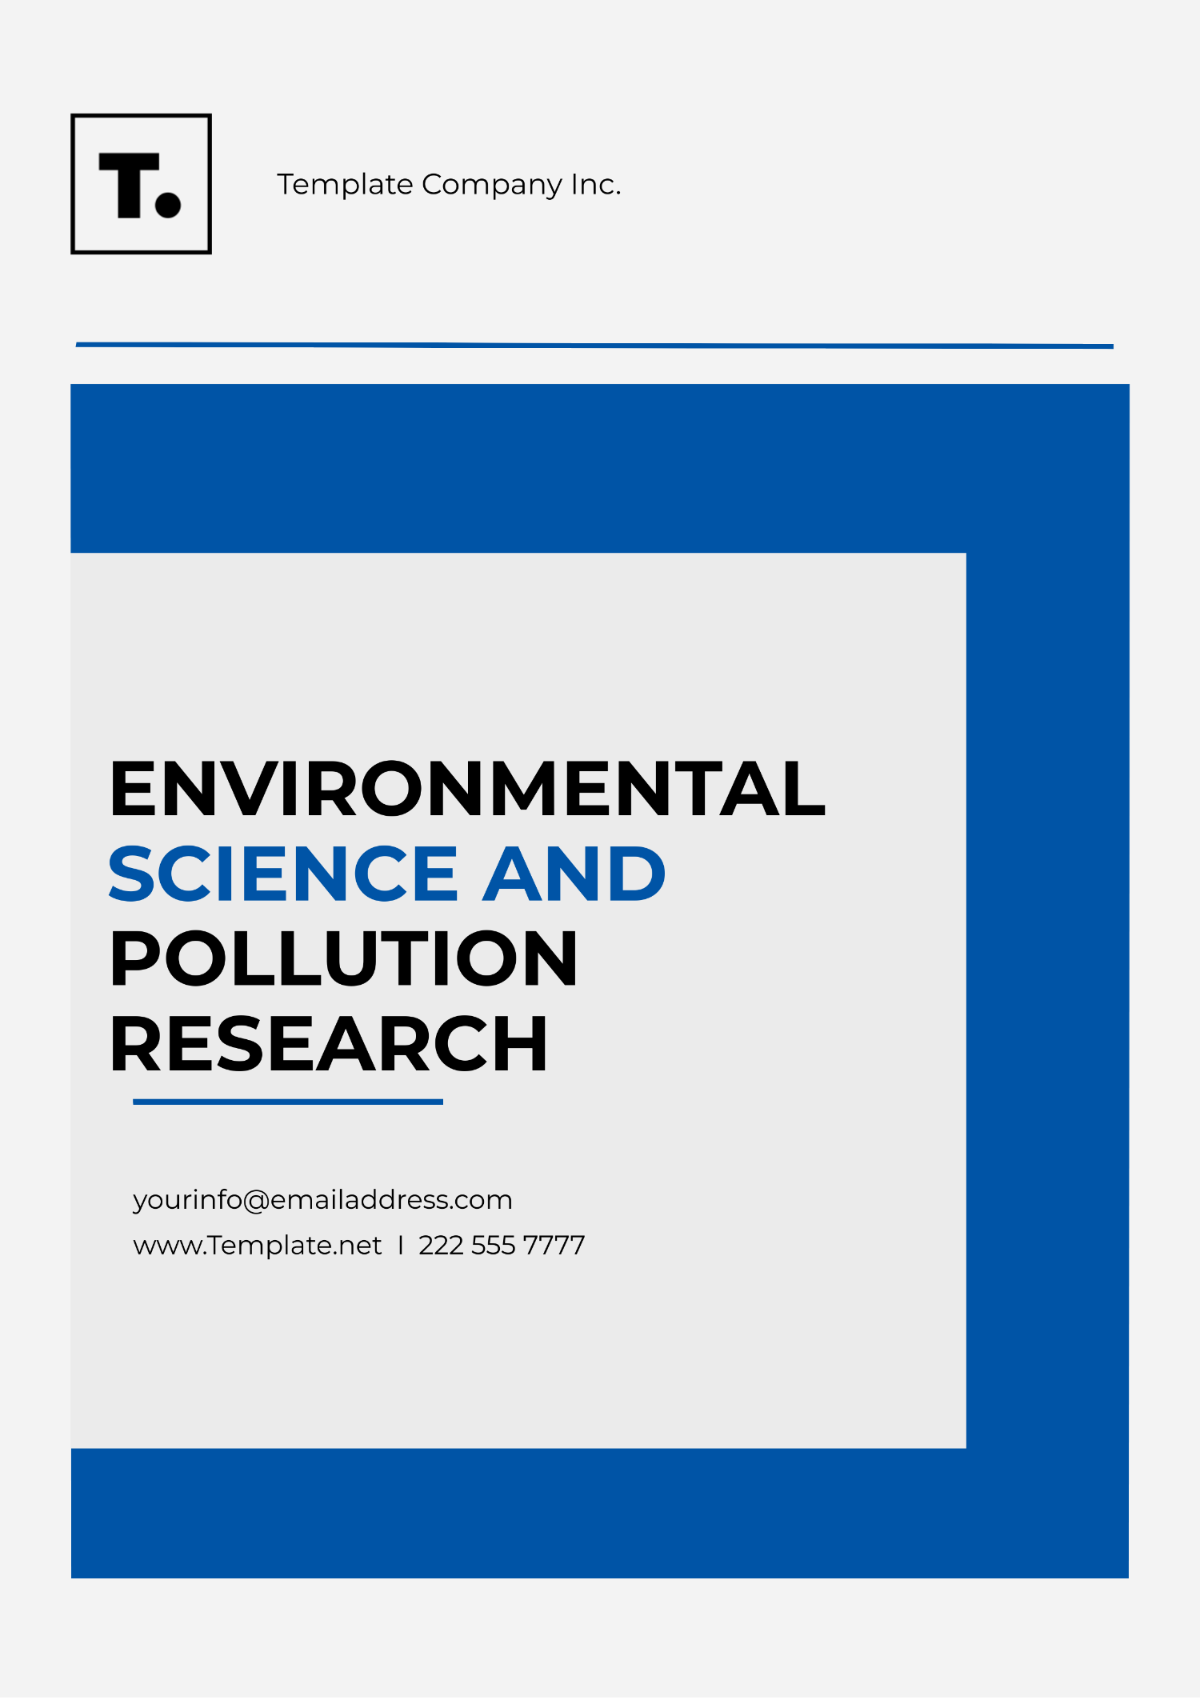 Free Environmental Science and Pollution Research Template